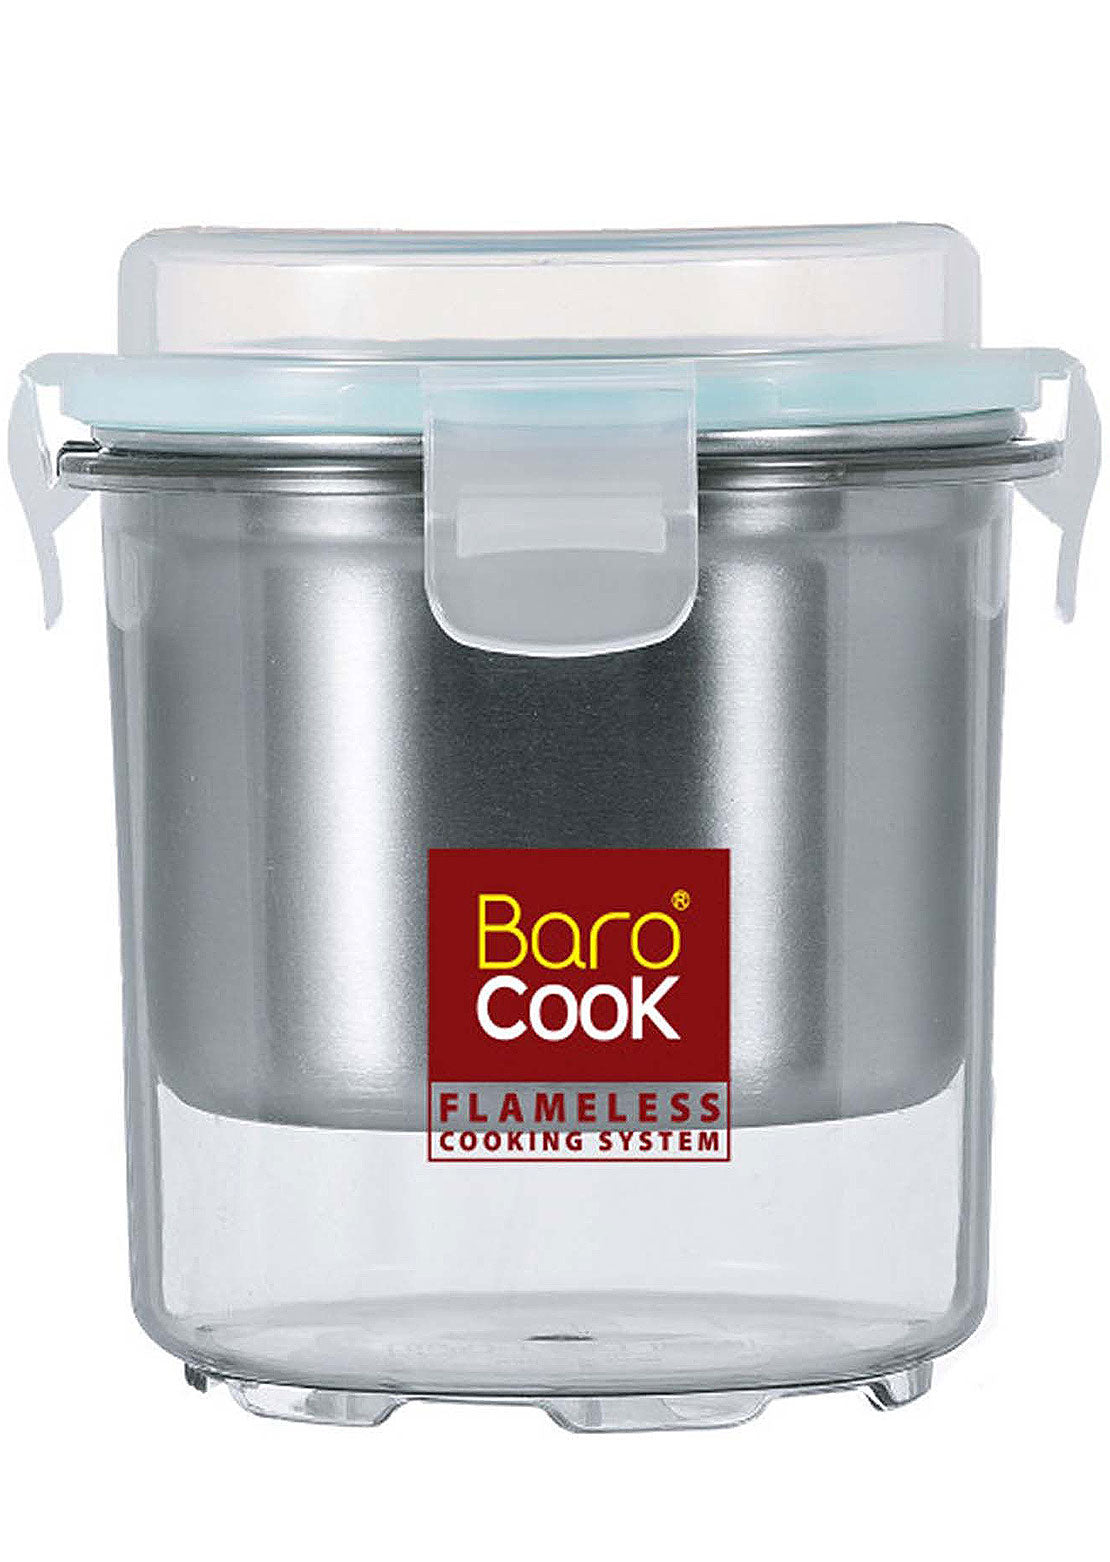 Barocook Round Flameless Cookware System 500ml